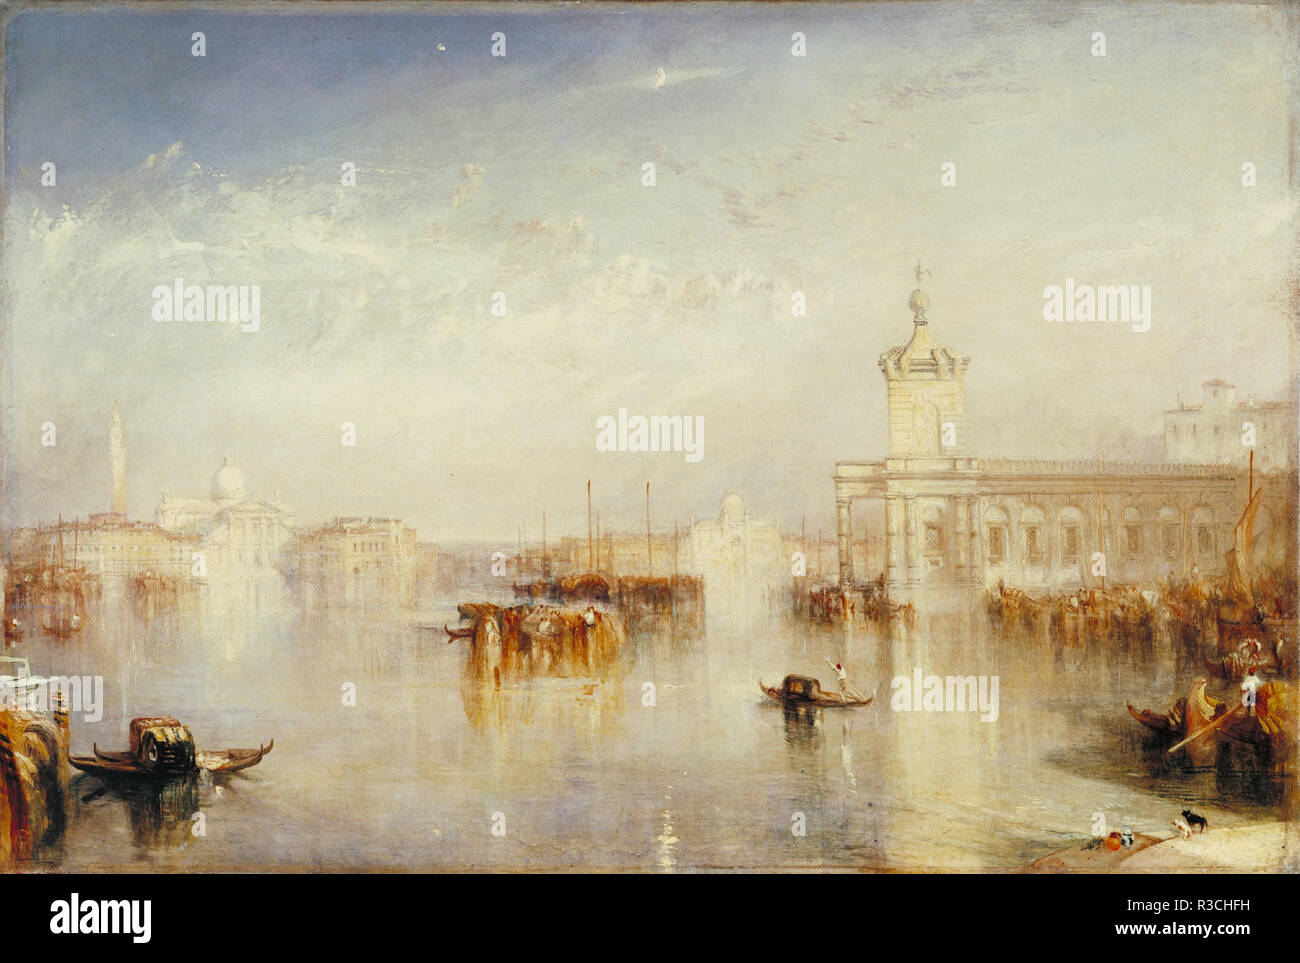 The Dogano, San Giorgio, Citella, from the Steps of the Europa. Date/Period: 1842. Painting. Oil on canvas. Height: 616 cm (20.2 ft); Width: 927 cm (10.1 yd). Author: J. M. W. Turner. TURNER, JOSEPH MALLORD WILLIAM. Stock Photo